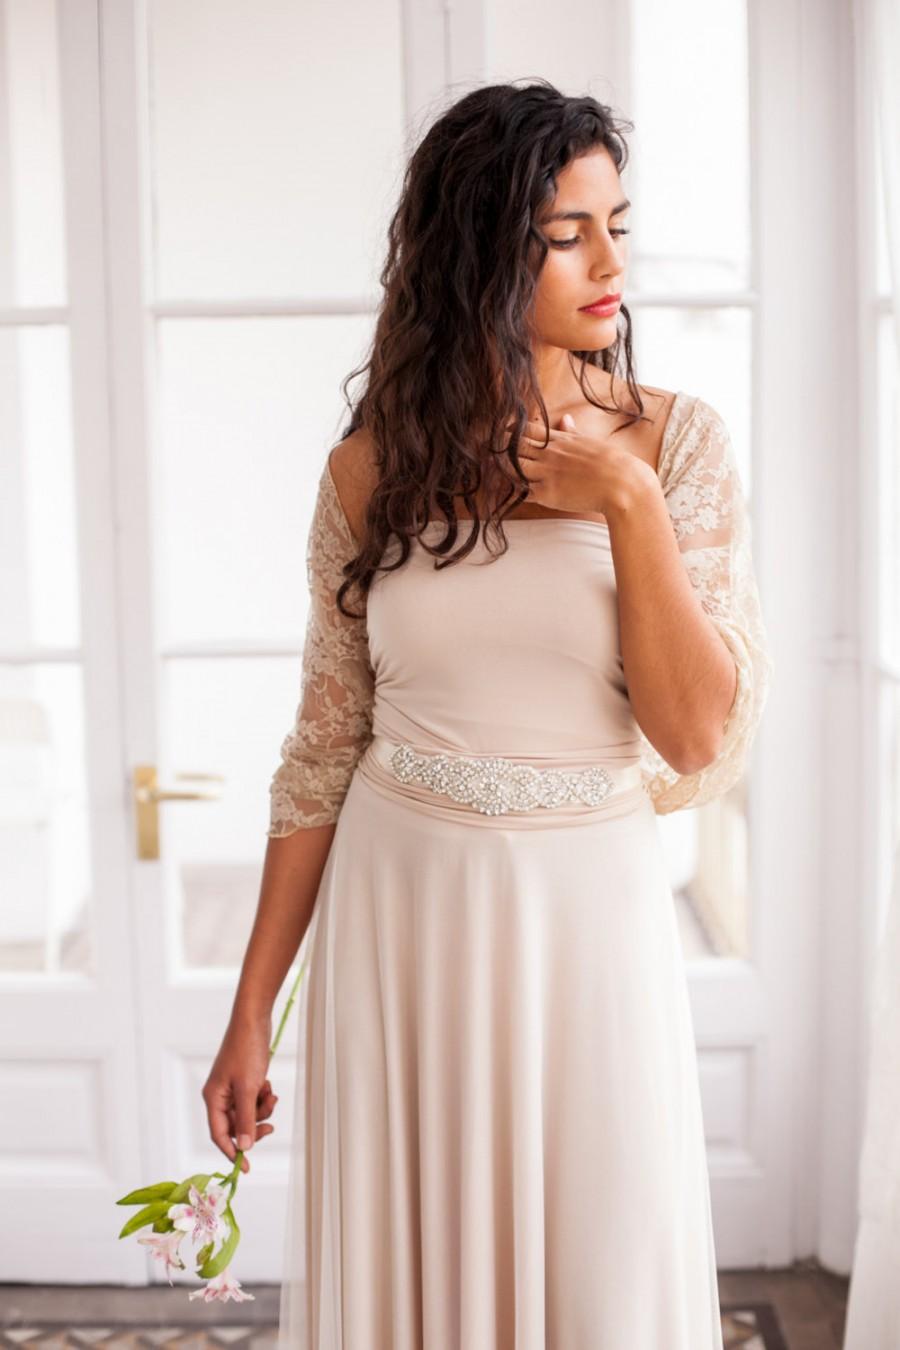 Amazing Golden Lace Wedding Dress of the decade The ultimate guide 